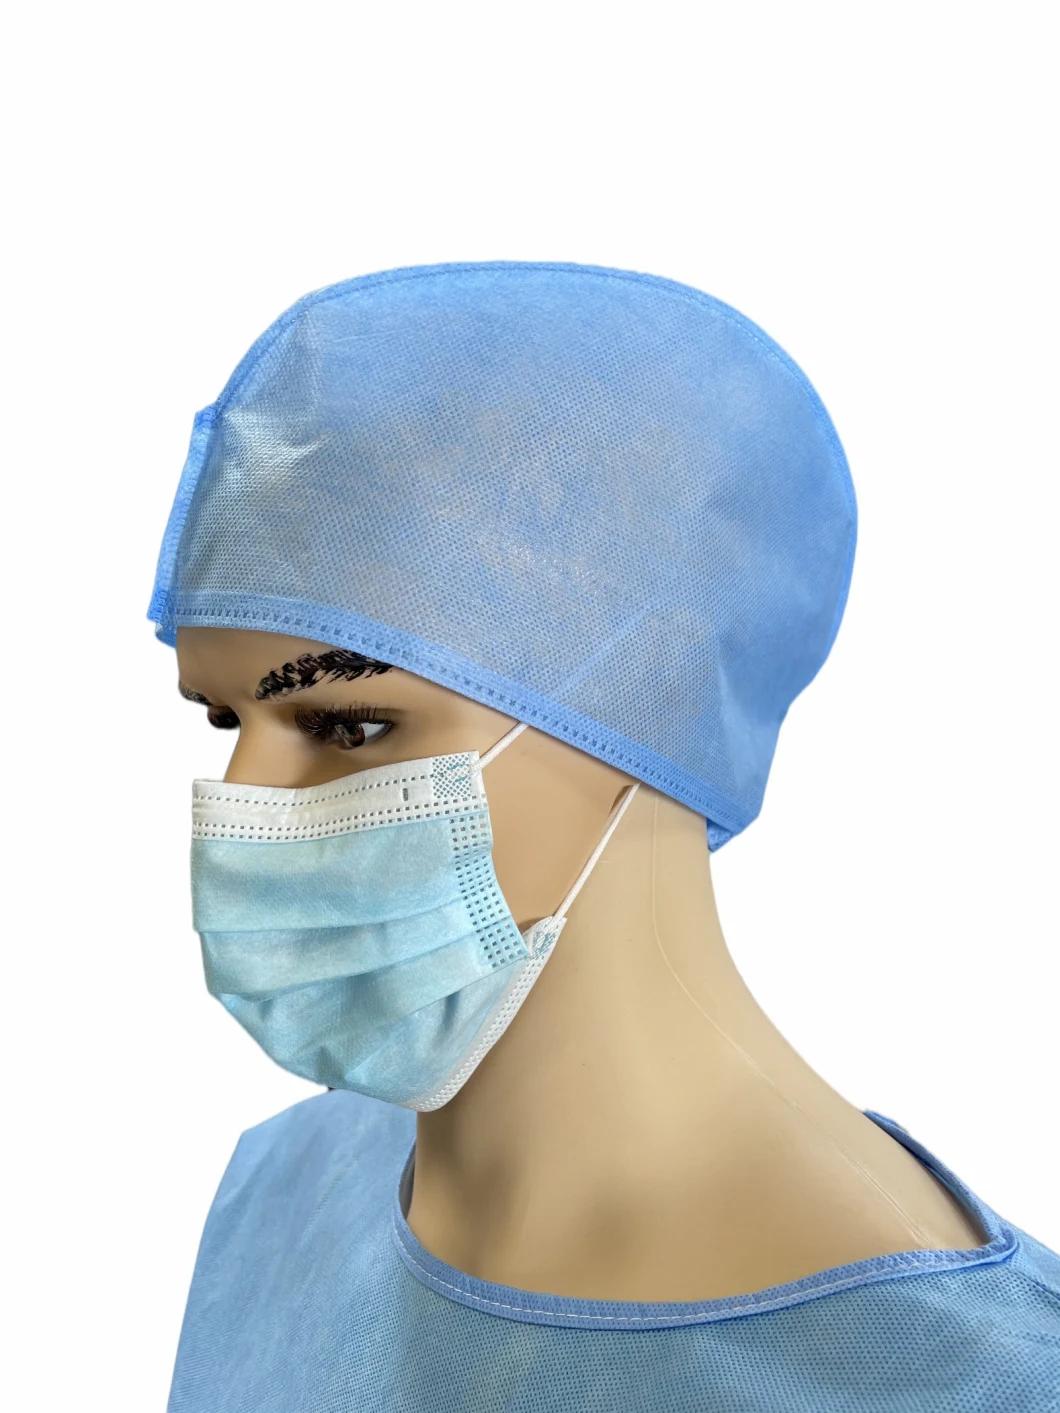 Head Cap for Women Doctors Disposable Doctor Cap Made in China